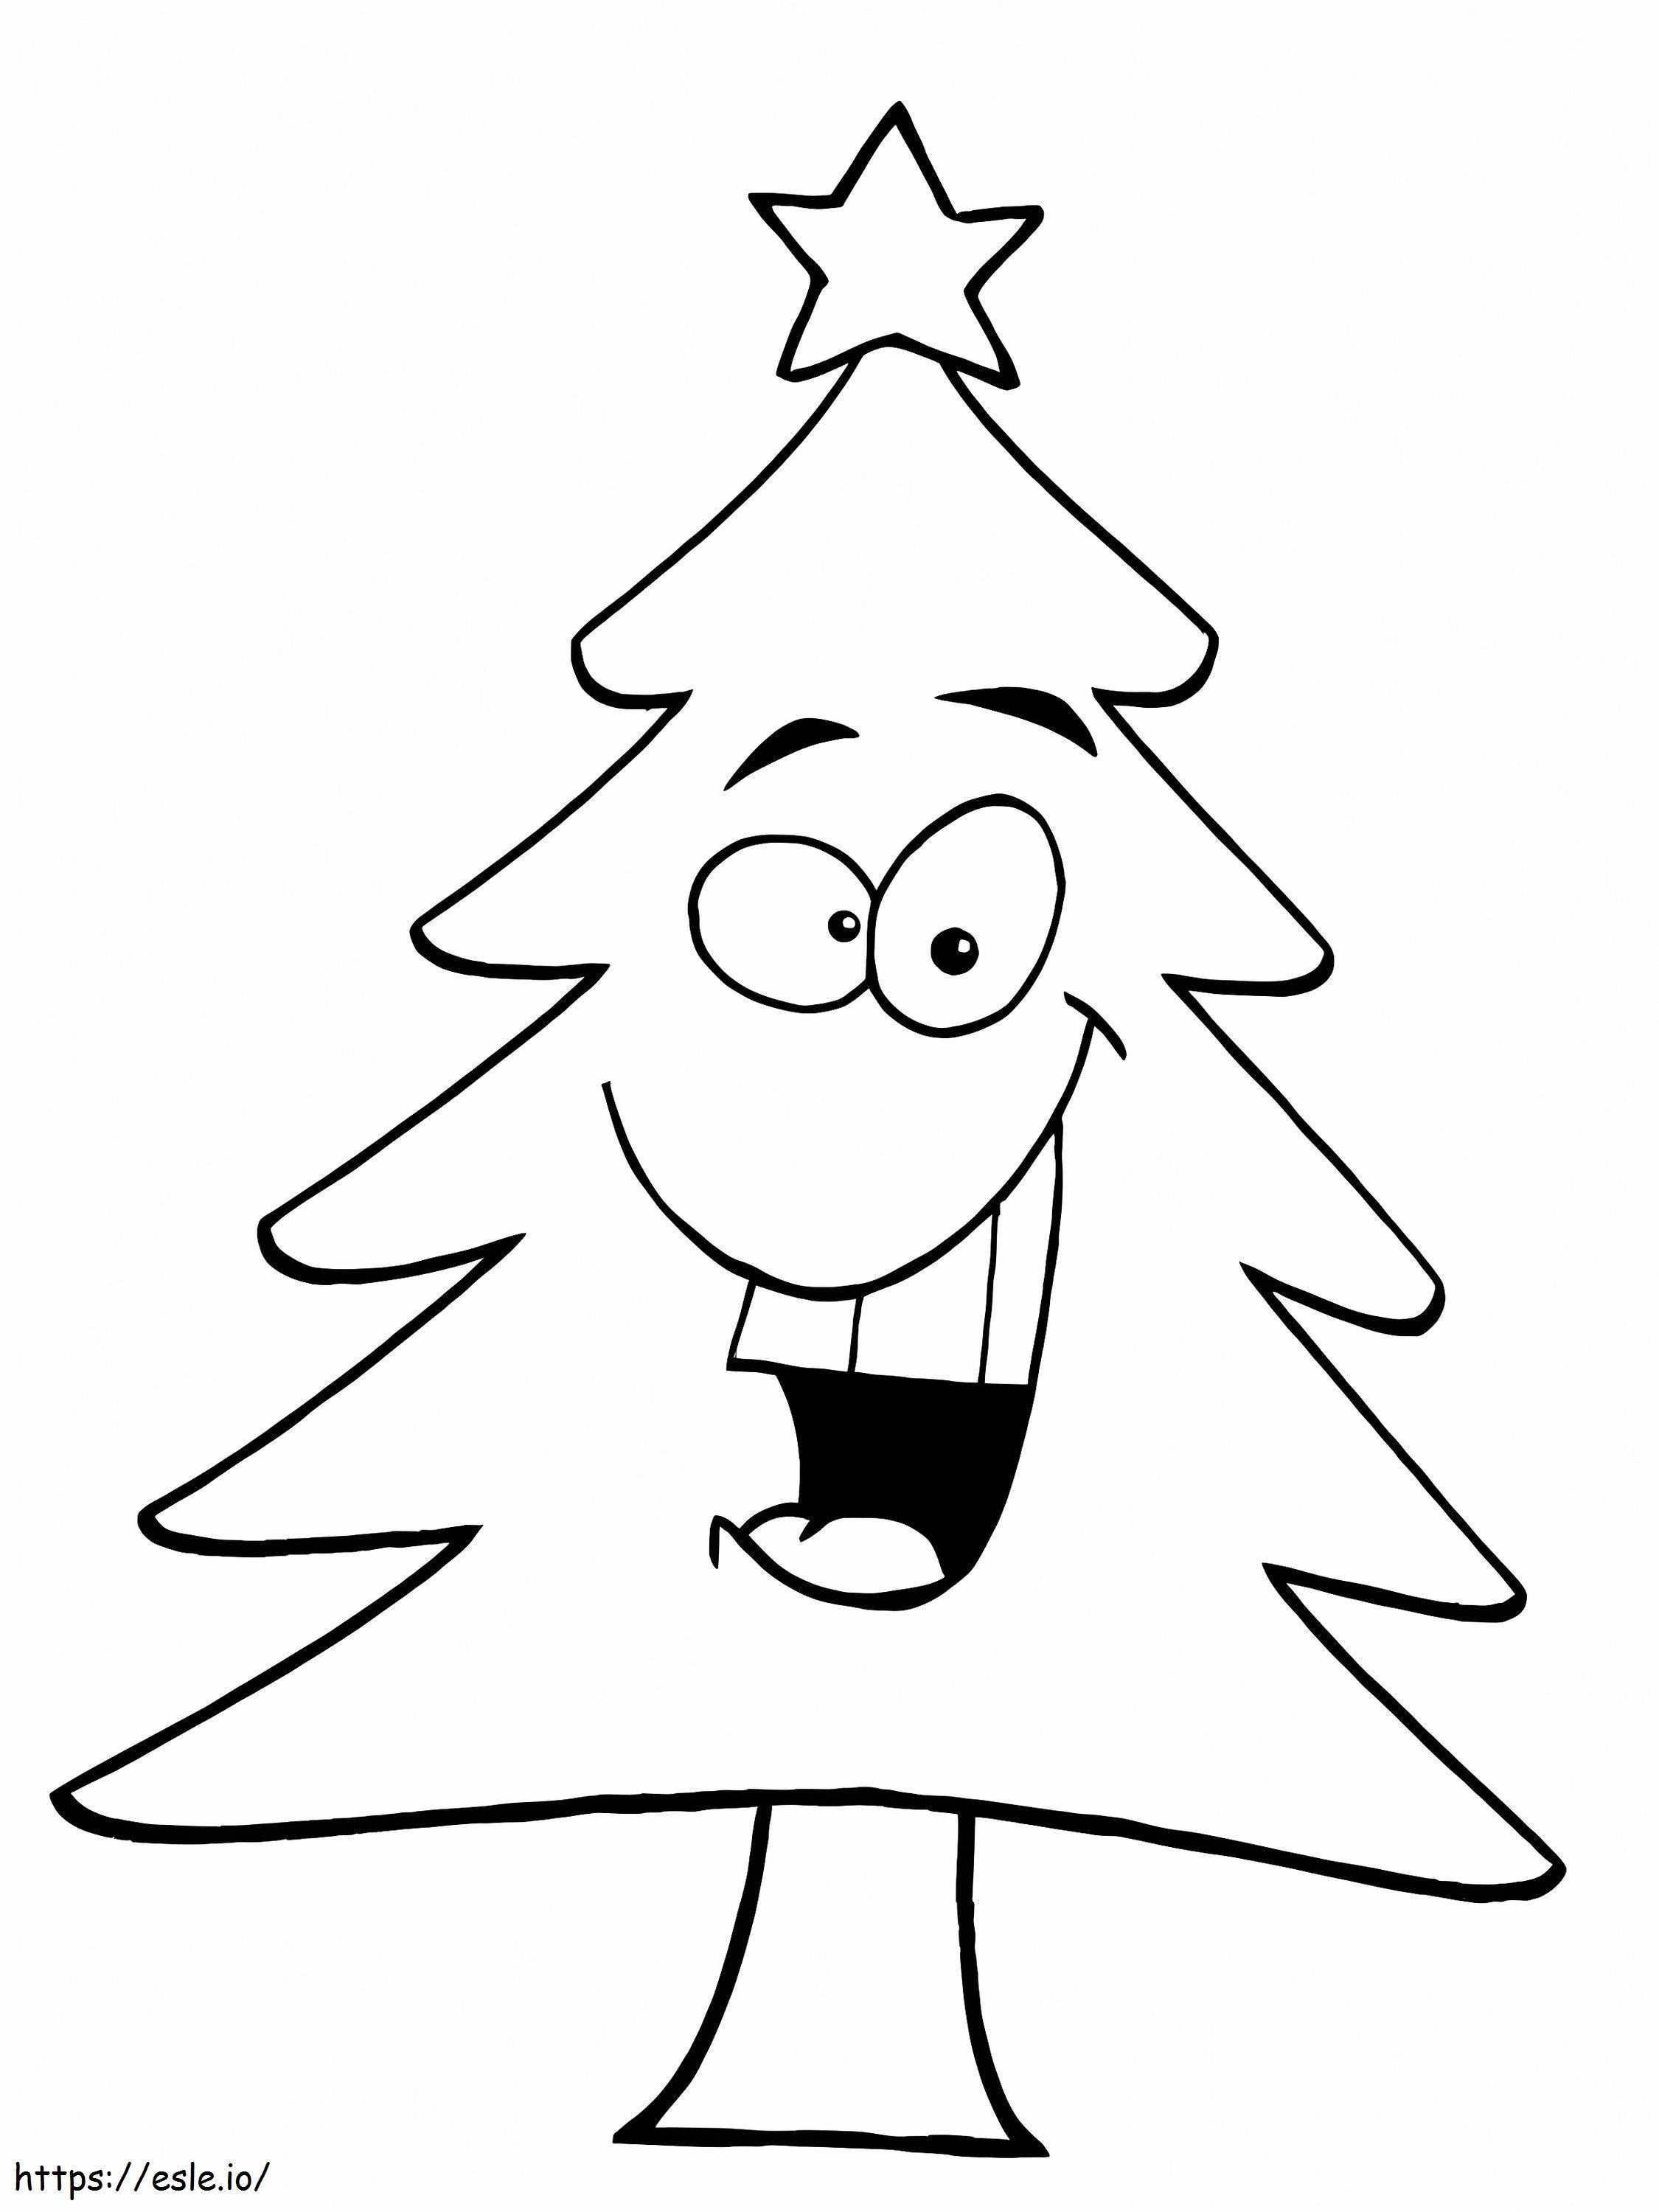 Funny Christmas Tree coloring page